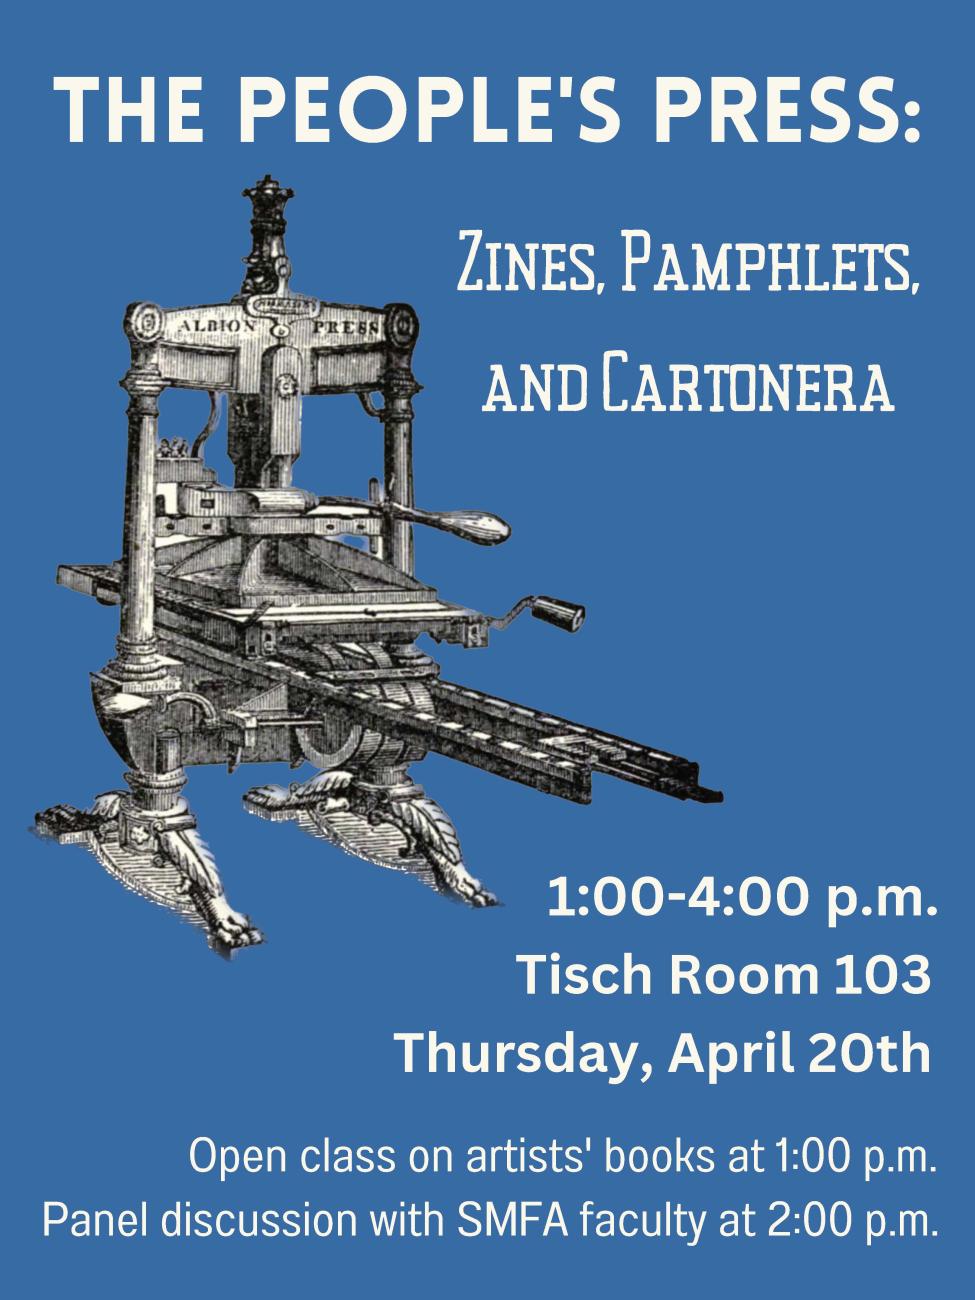 The People's Press: Zines, Pamphlets and Cartonera. Thursday, April 20th from 1:00-4:00 p.m. in Tisch Library Room 103. Open class on artists' books at 1:00 p.m. followed by a panel discussion with SMFA faculty at 2:00 p.m.